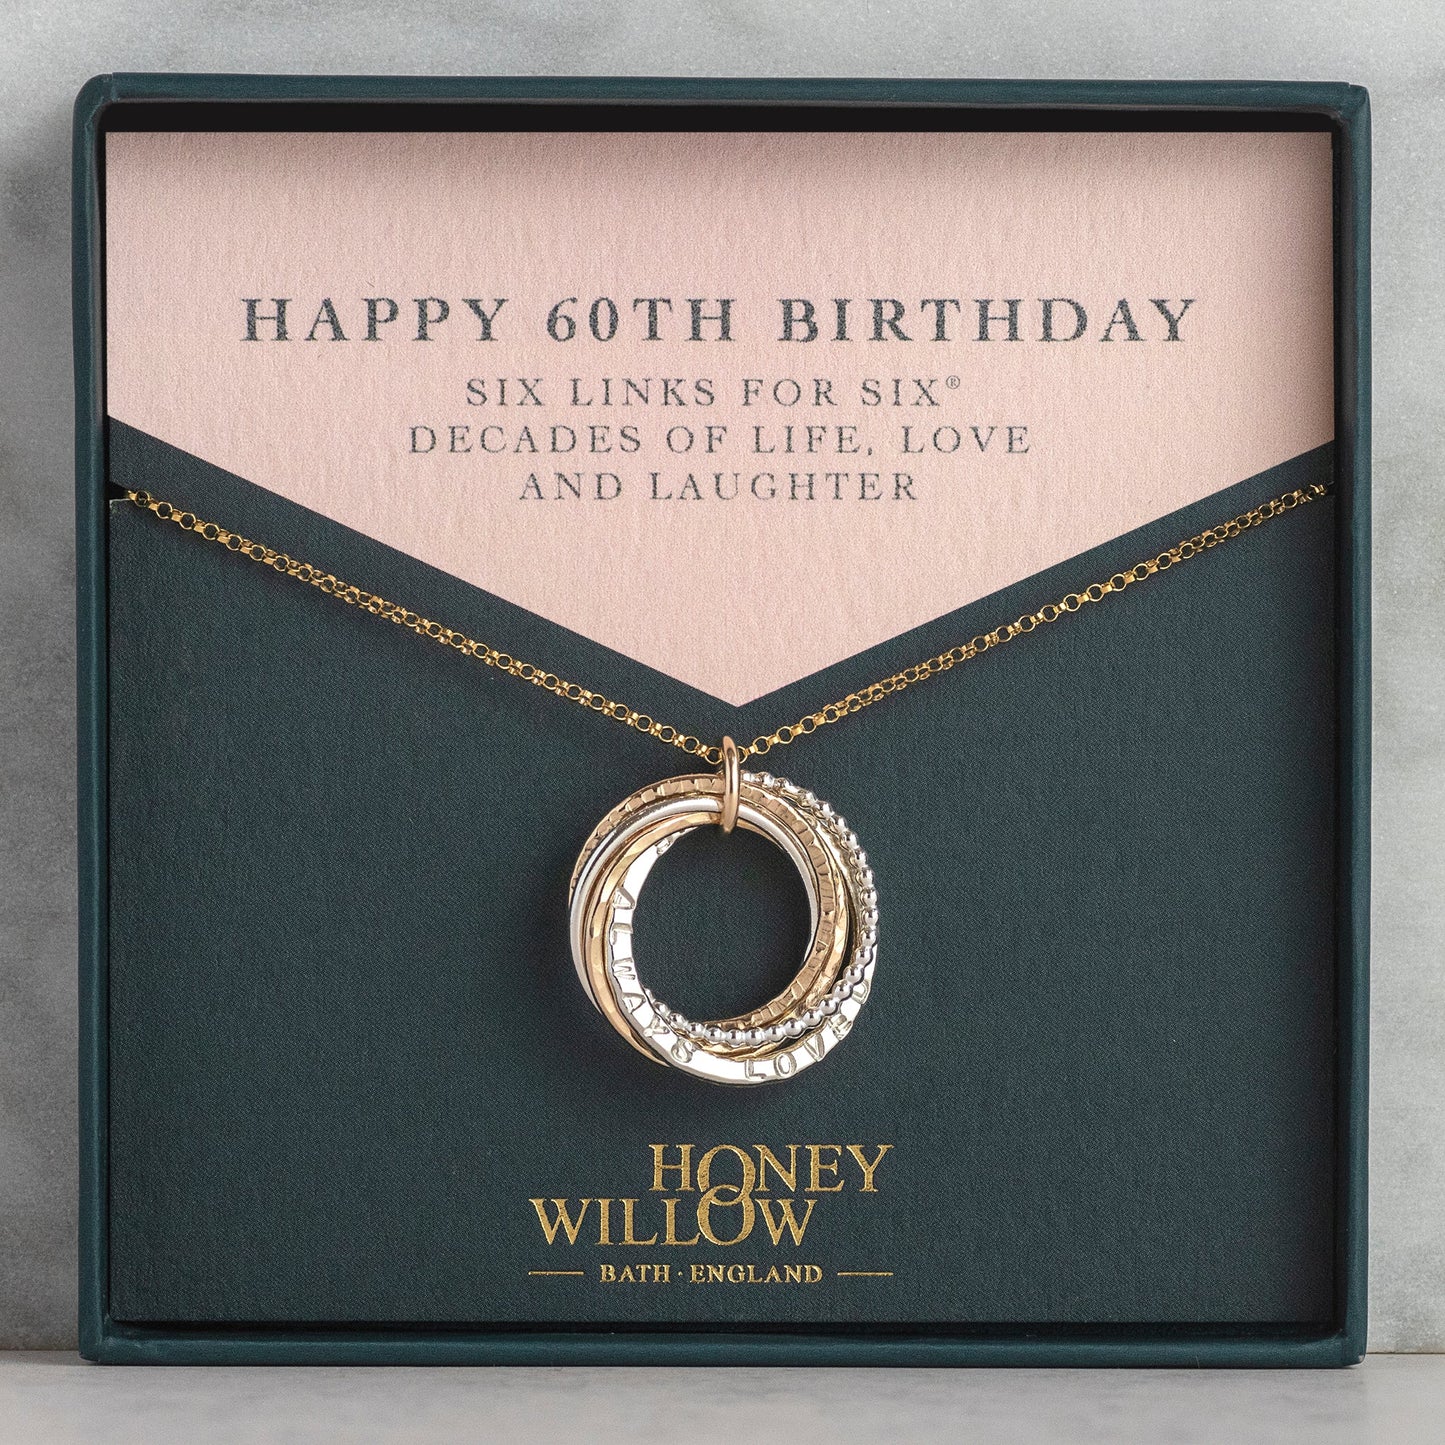 Personalised 60th Birthday Necklace - Hand-Stamped - The Original 6 Links for 6 Decades Necklace - Silver & Gold